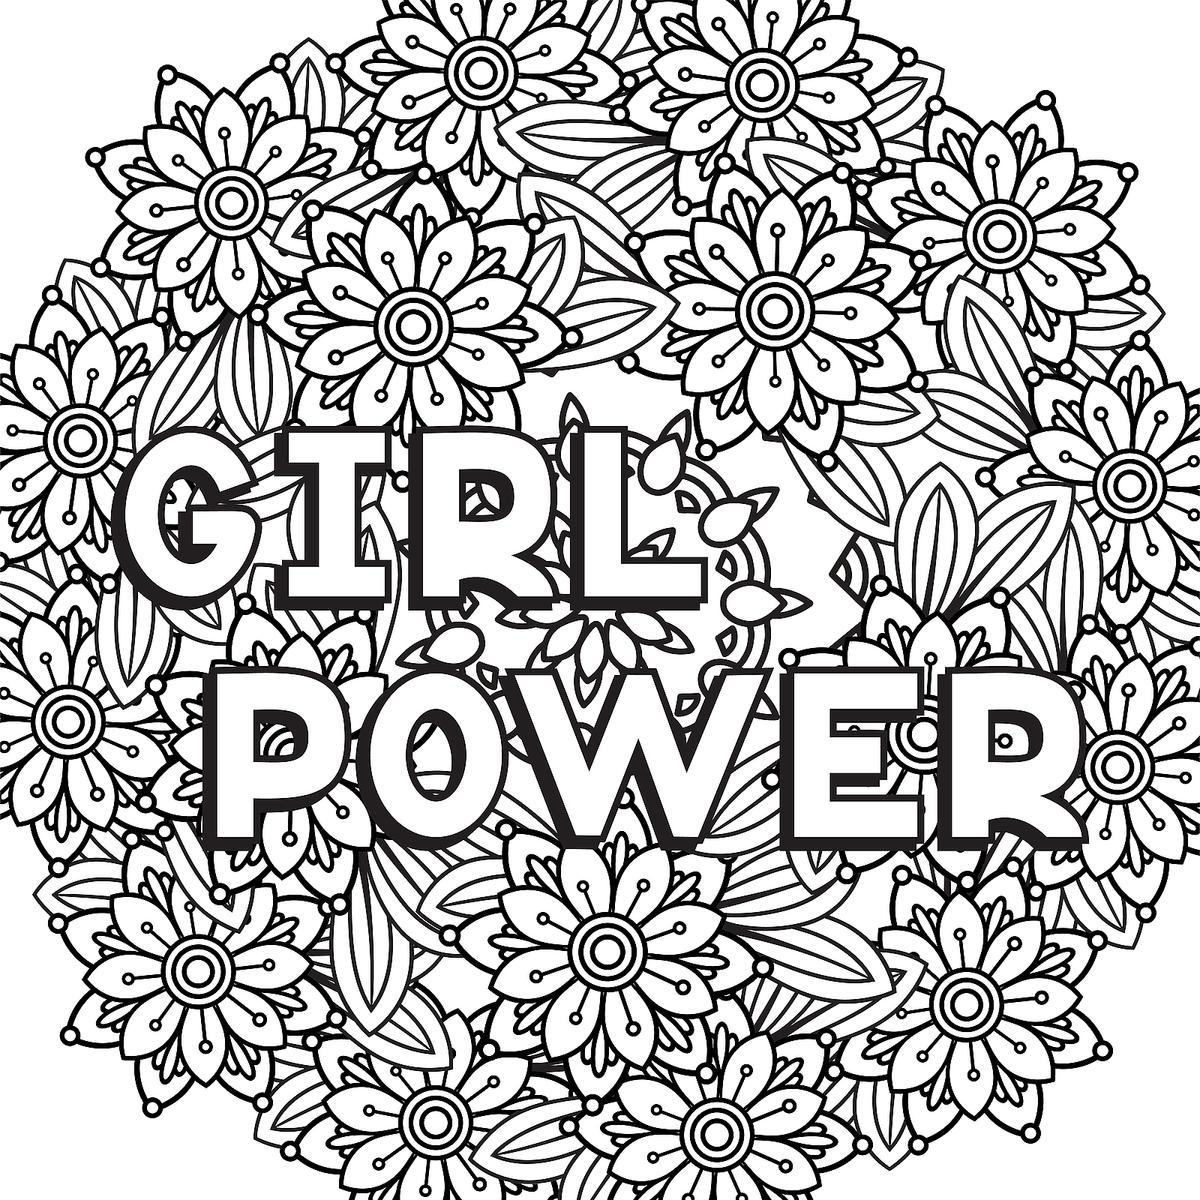 Coloring Pages : Girl Power Coloring Pages Xxable Pa Strong Women For Girls  Printable Coloring Pages For Girls ~ Off-The Wall ATL